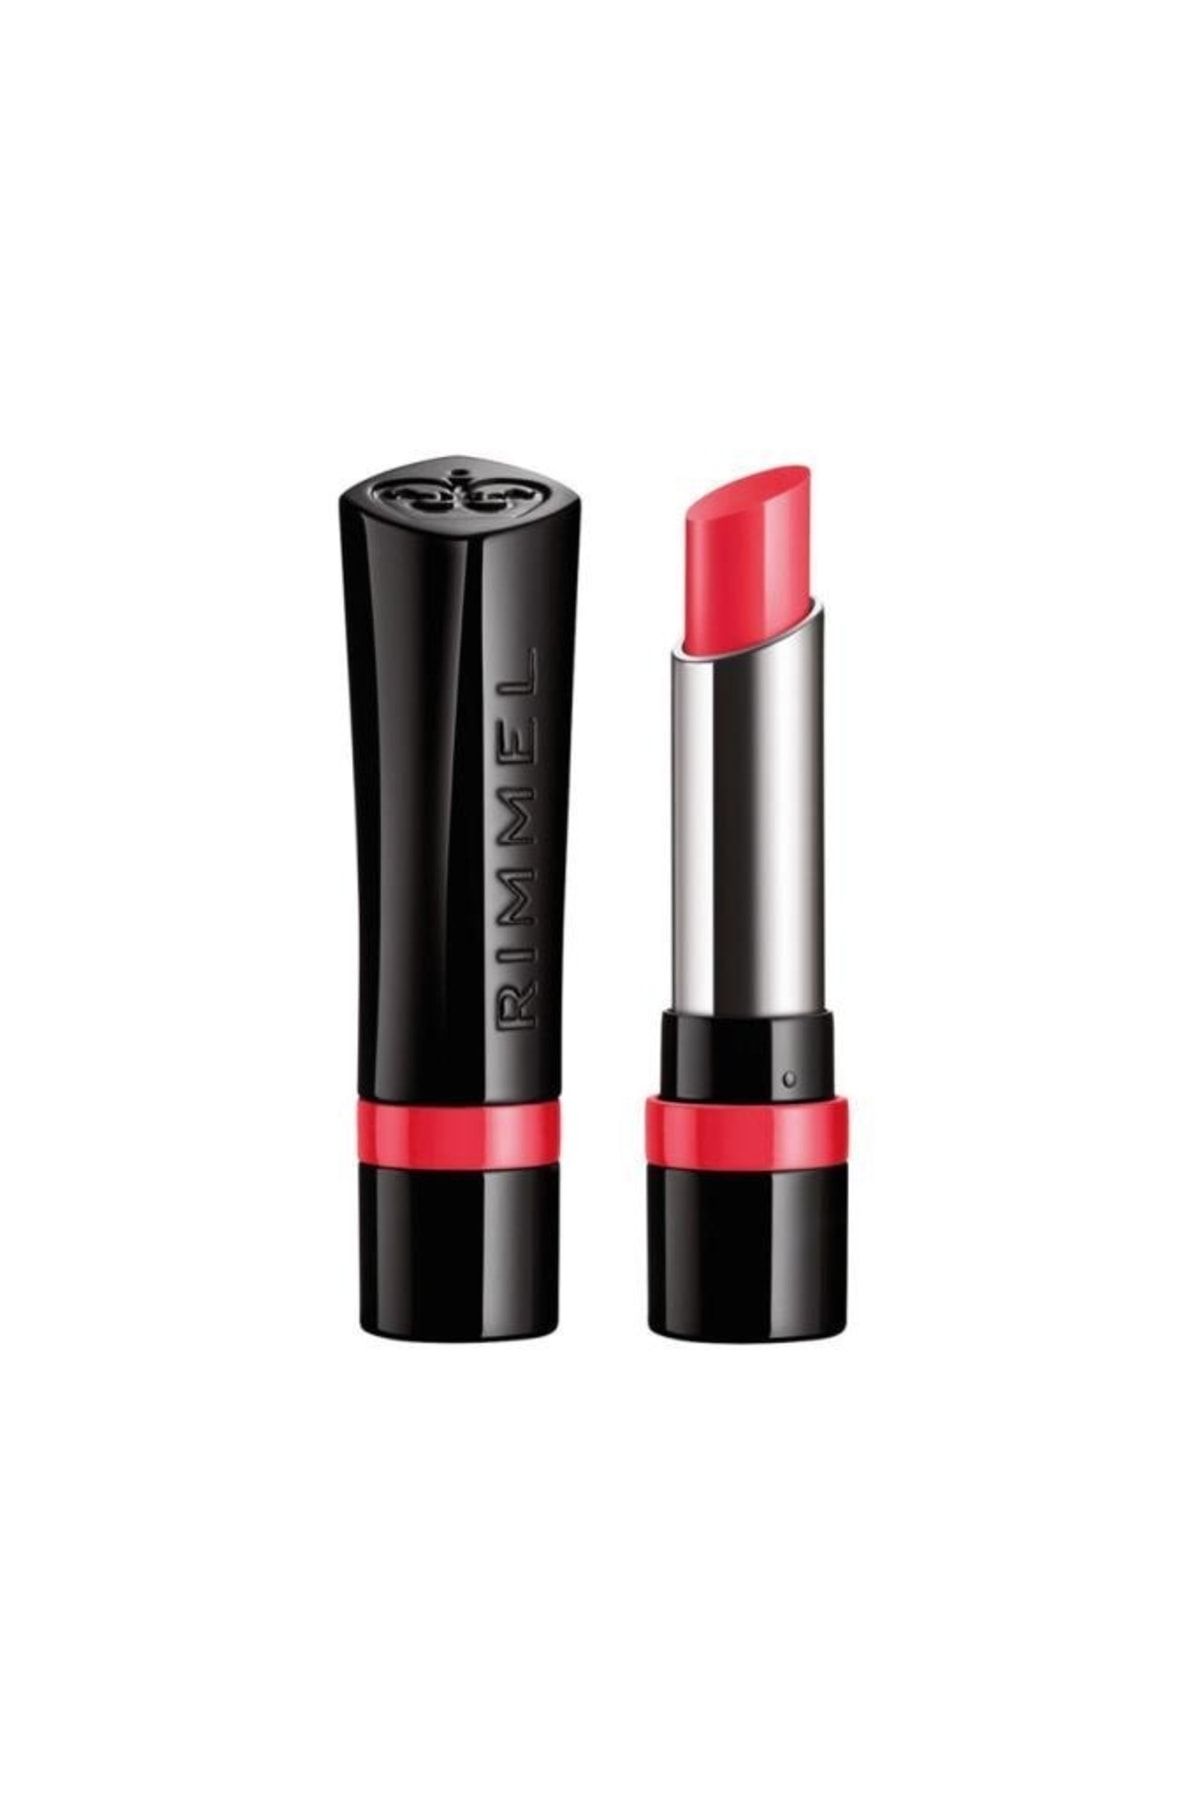 Rimmel London The Only 1 Lipstick 610 Cheeky Coral